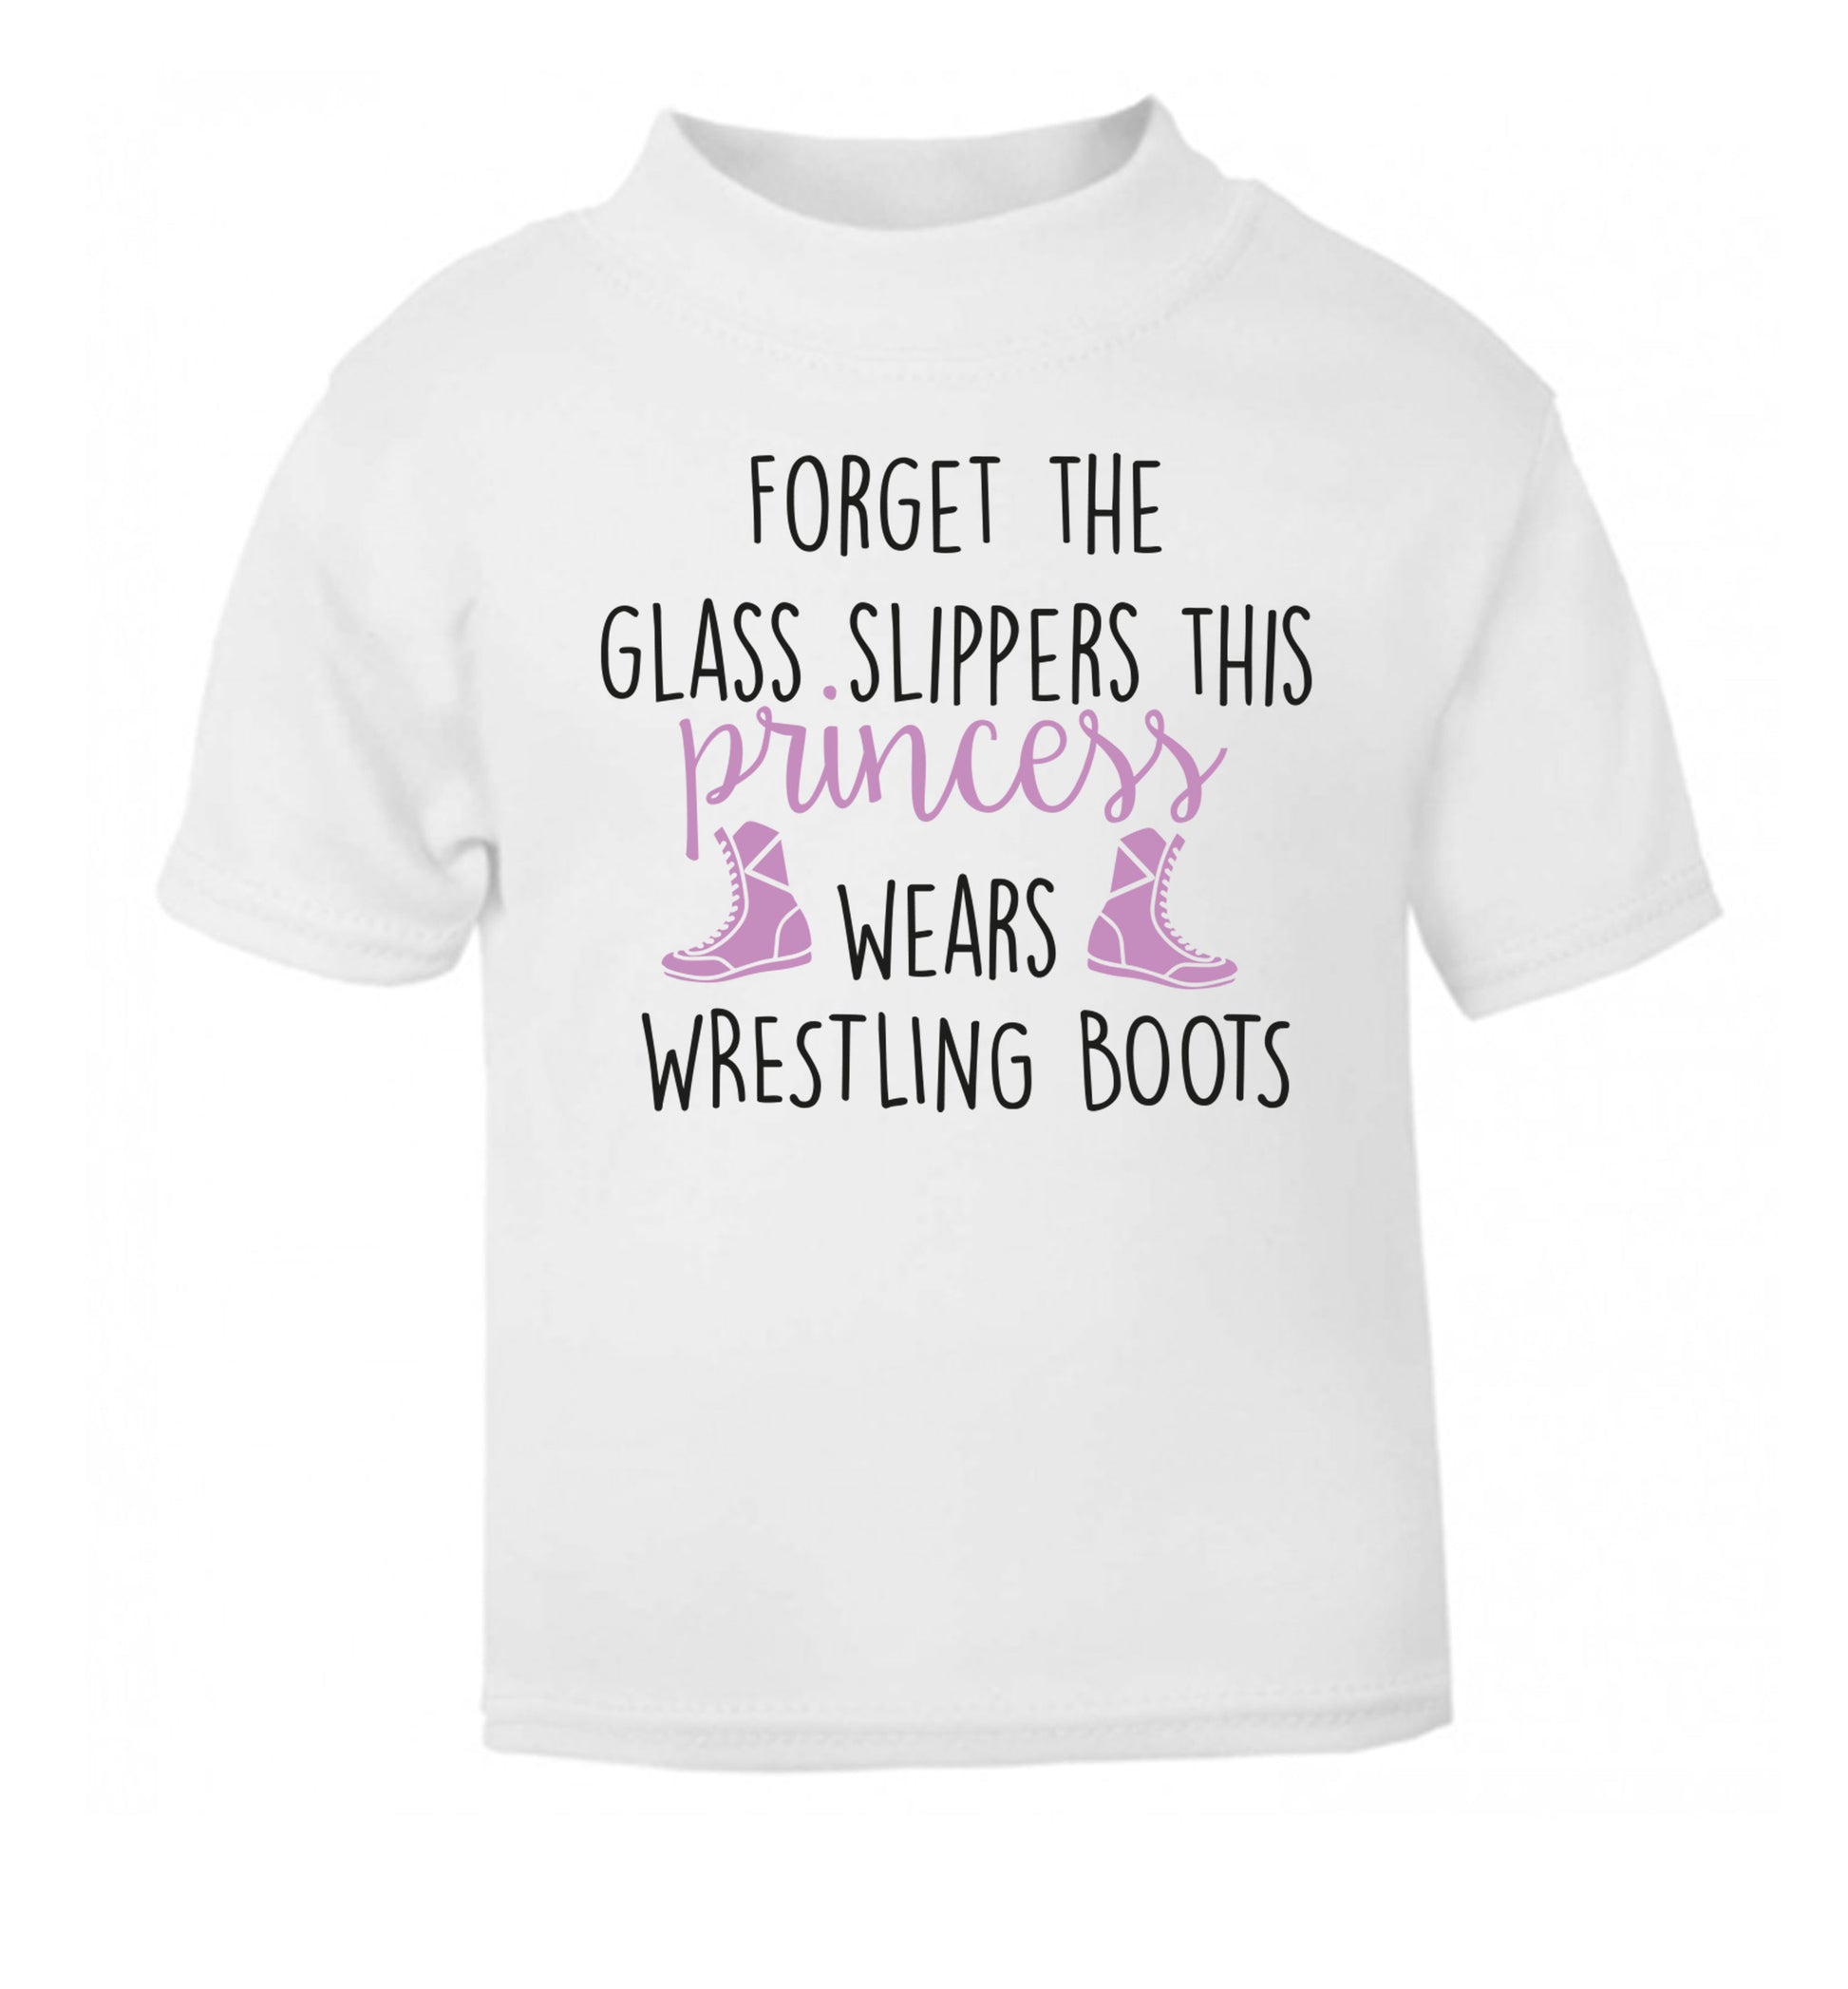 Forget the glass slippers this princess wears wrestling boots white Baby Toddler Tshirt 2 Years